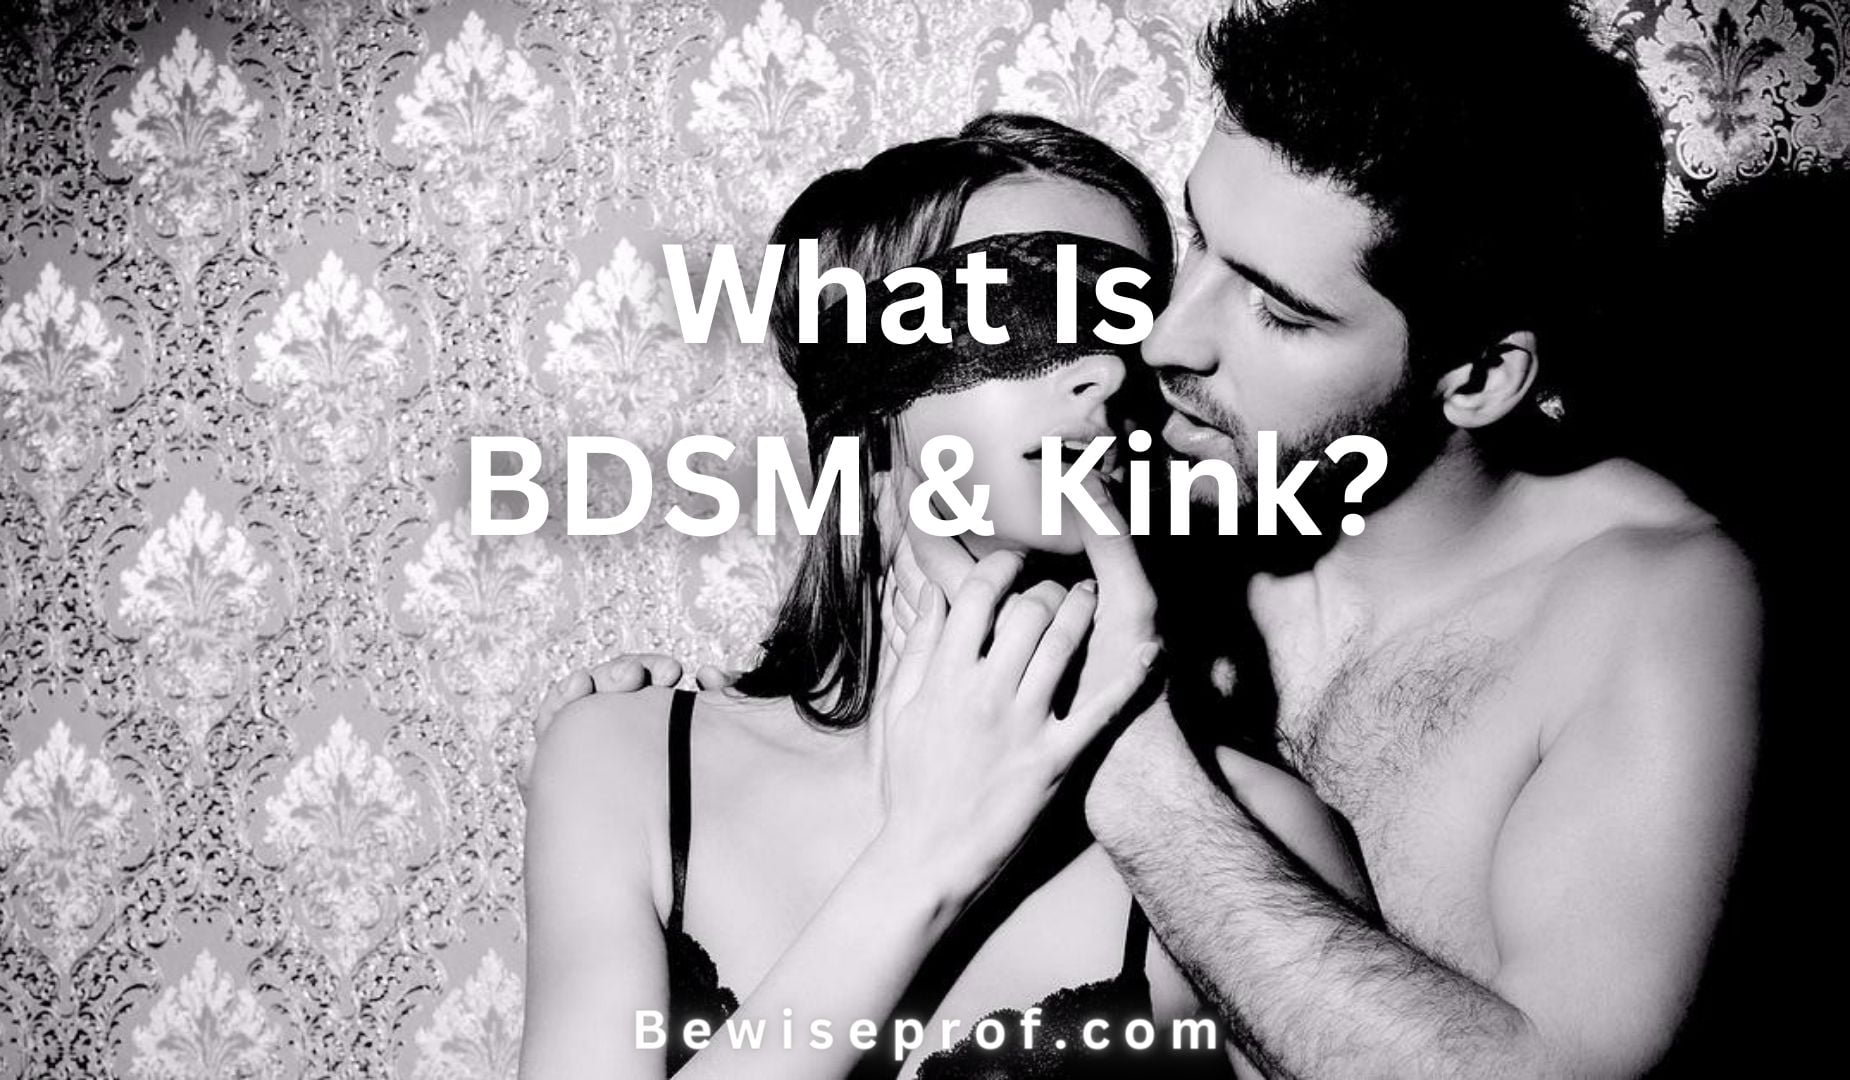 What Is BDSM And Kink?